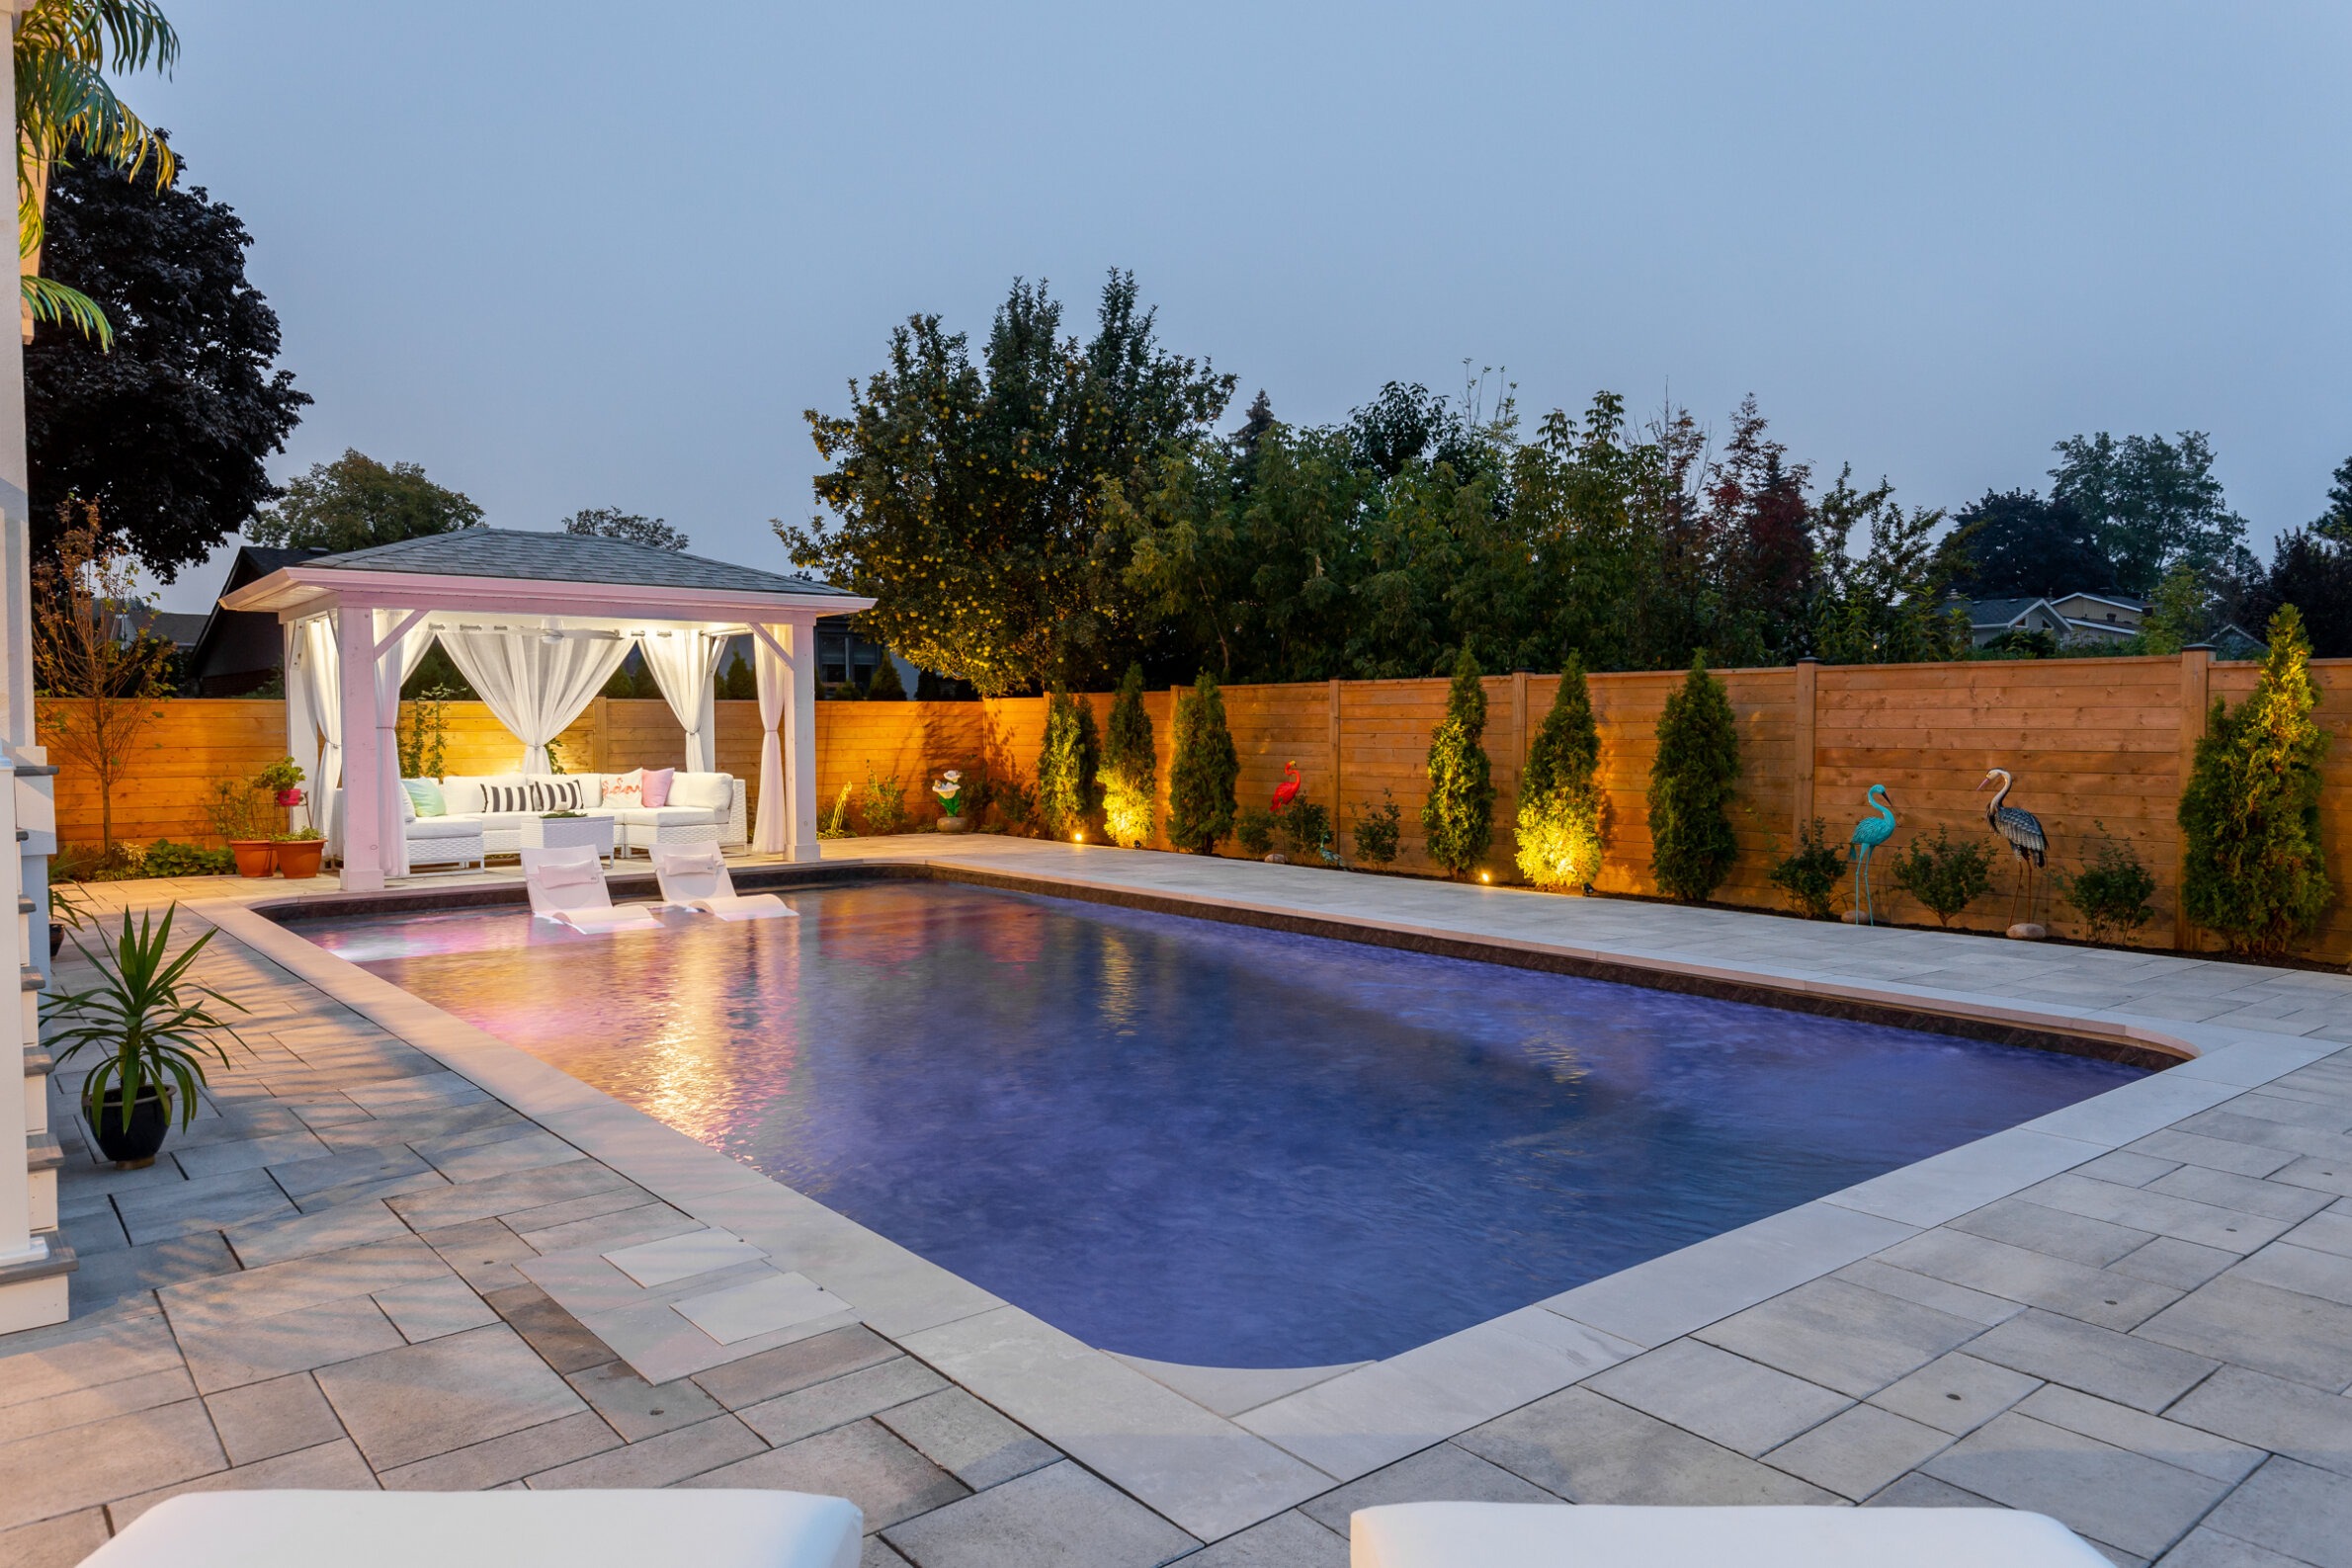 An elegant outdoor swimming pool at dusk, with a white gazebo, lounge chairs, ambient lighting, decorative bird sculptures, and a landscaped garden.